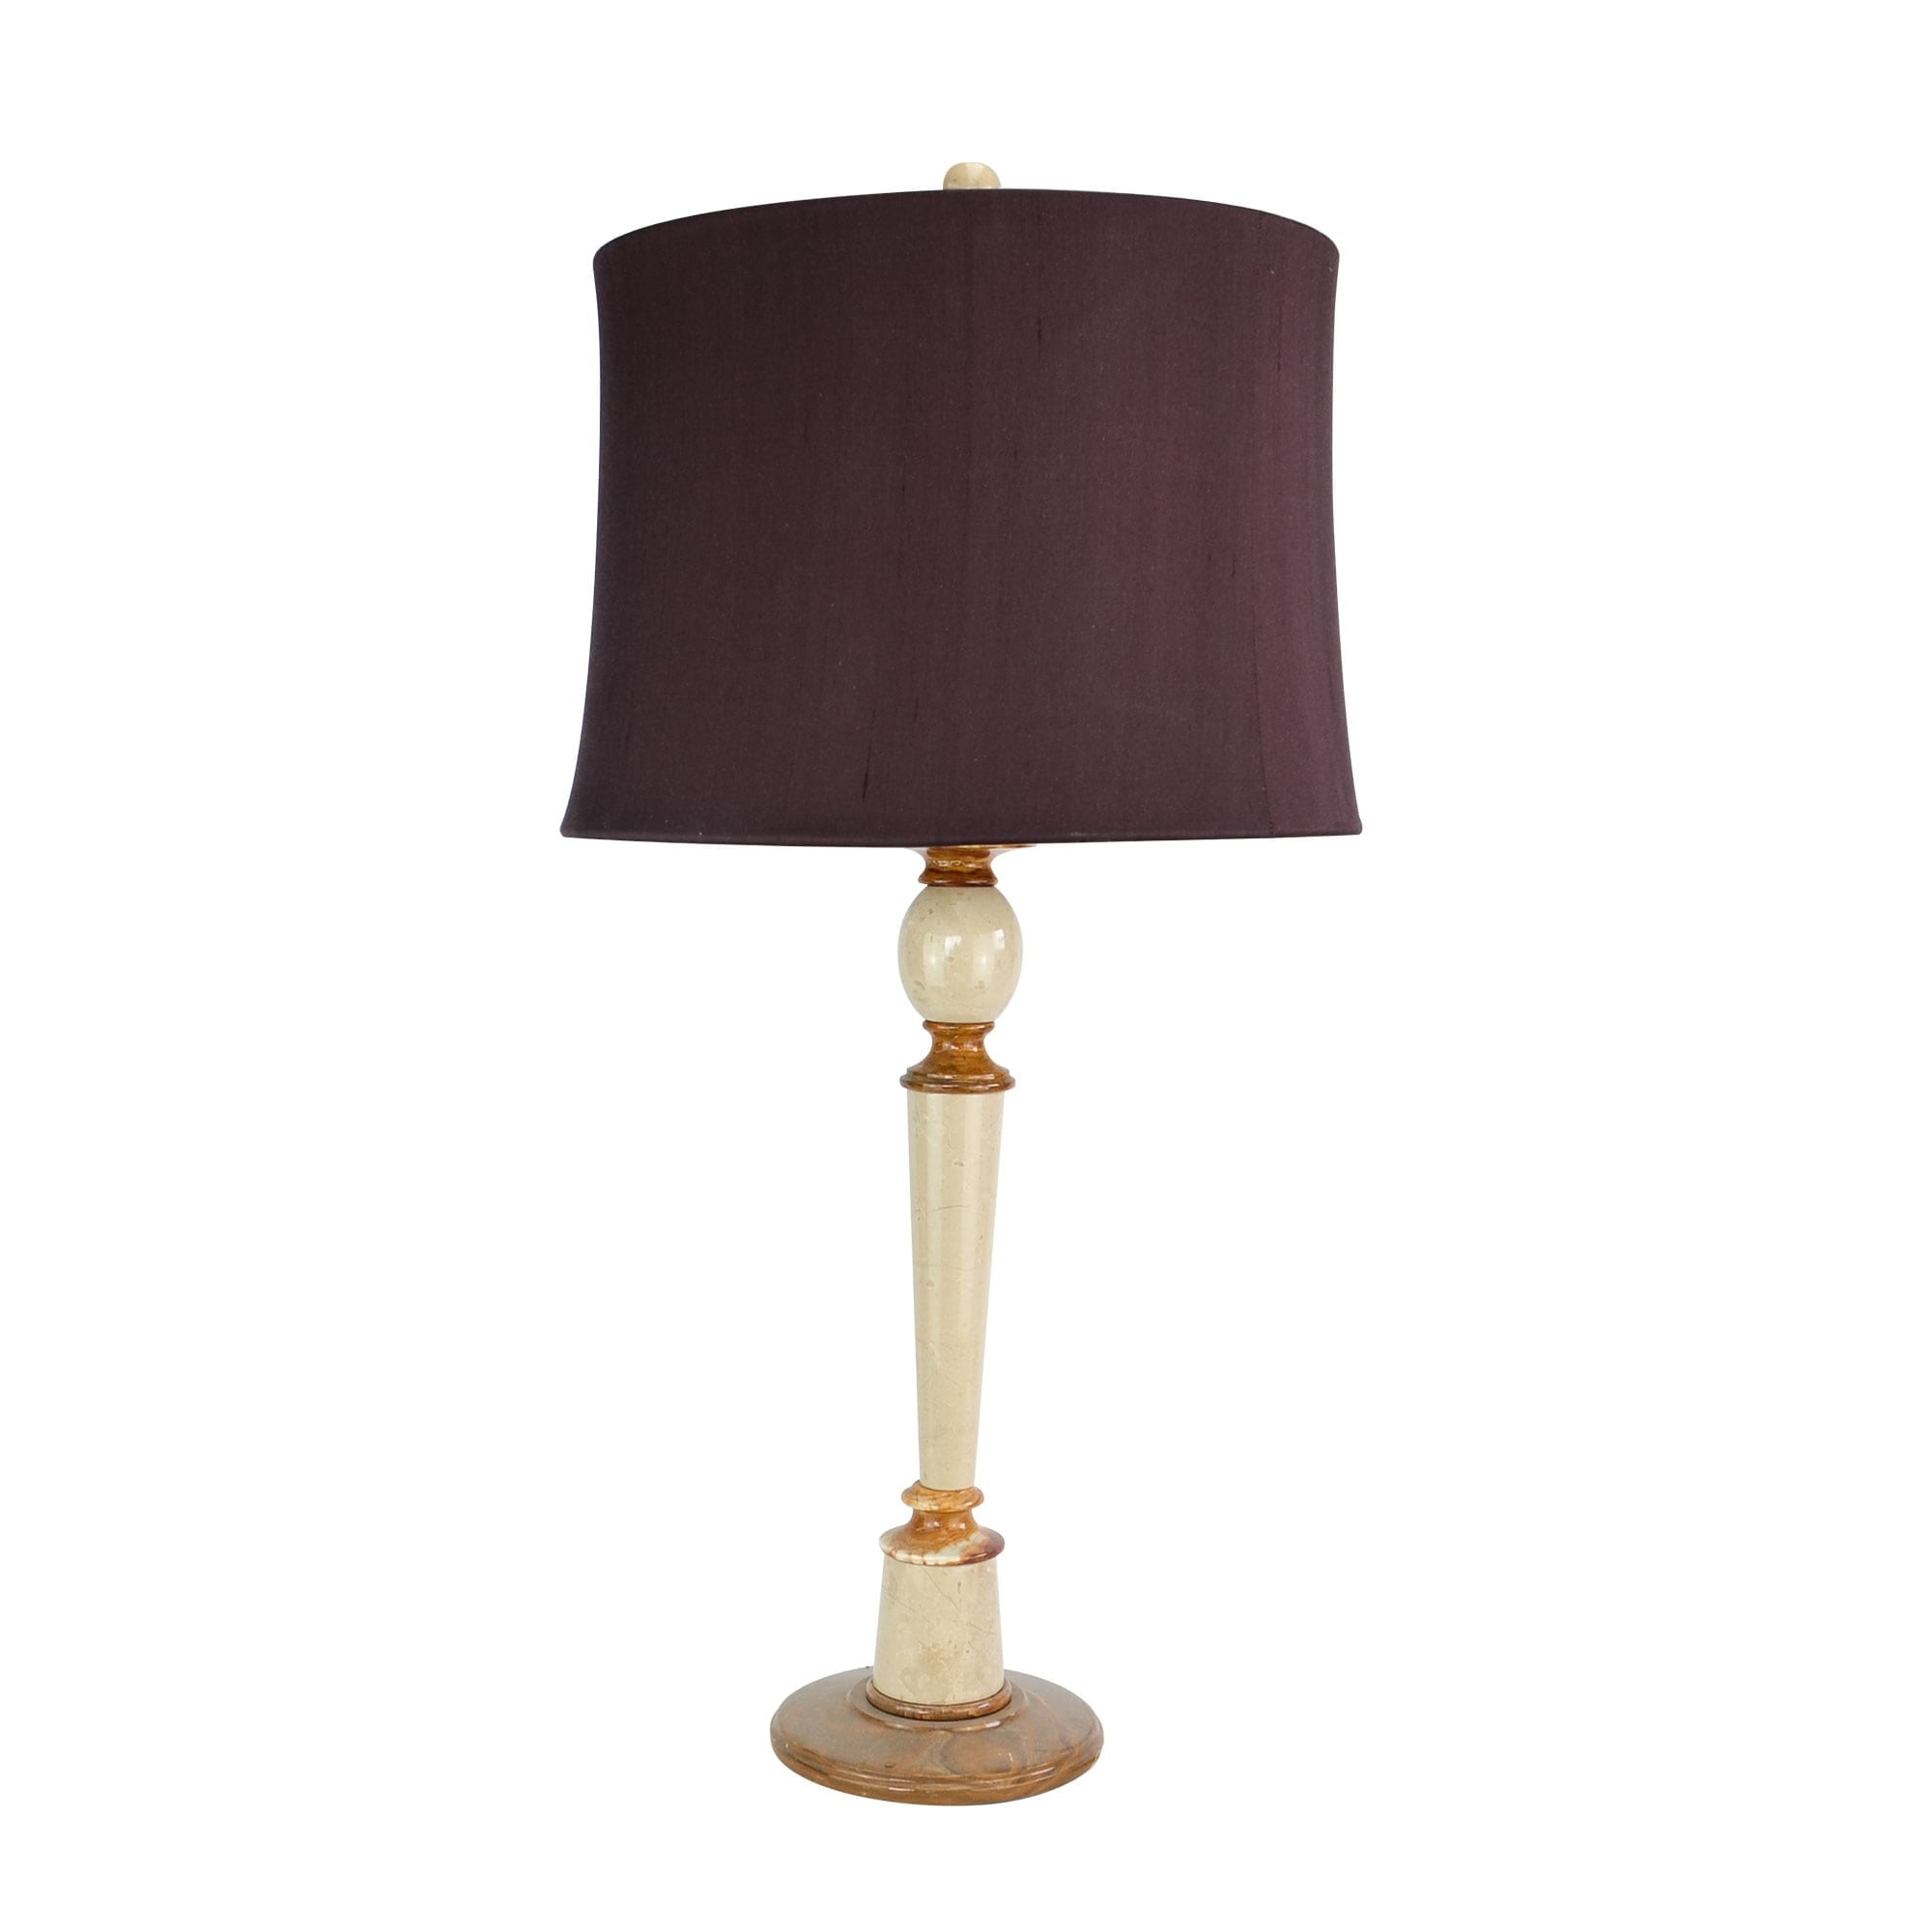 Tall Marble Table Lamp Plumefall, Chartreuse Table Lamp